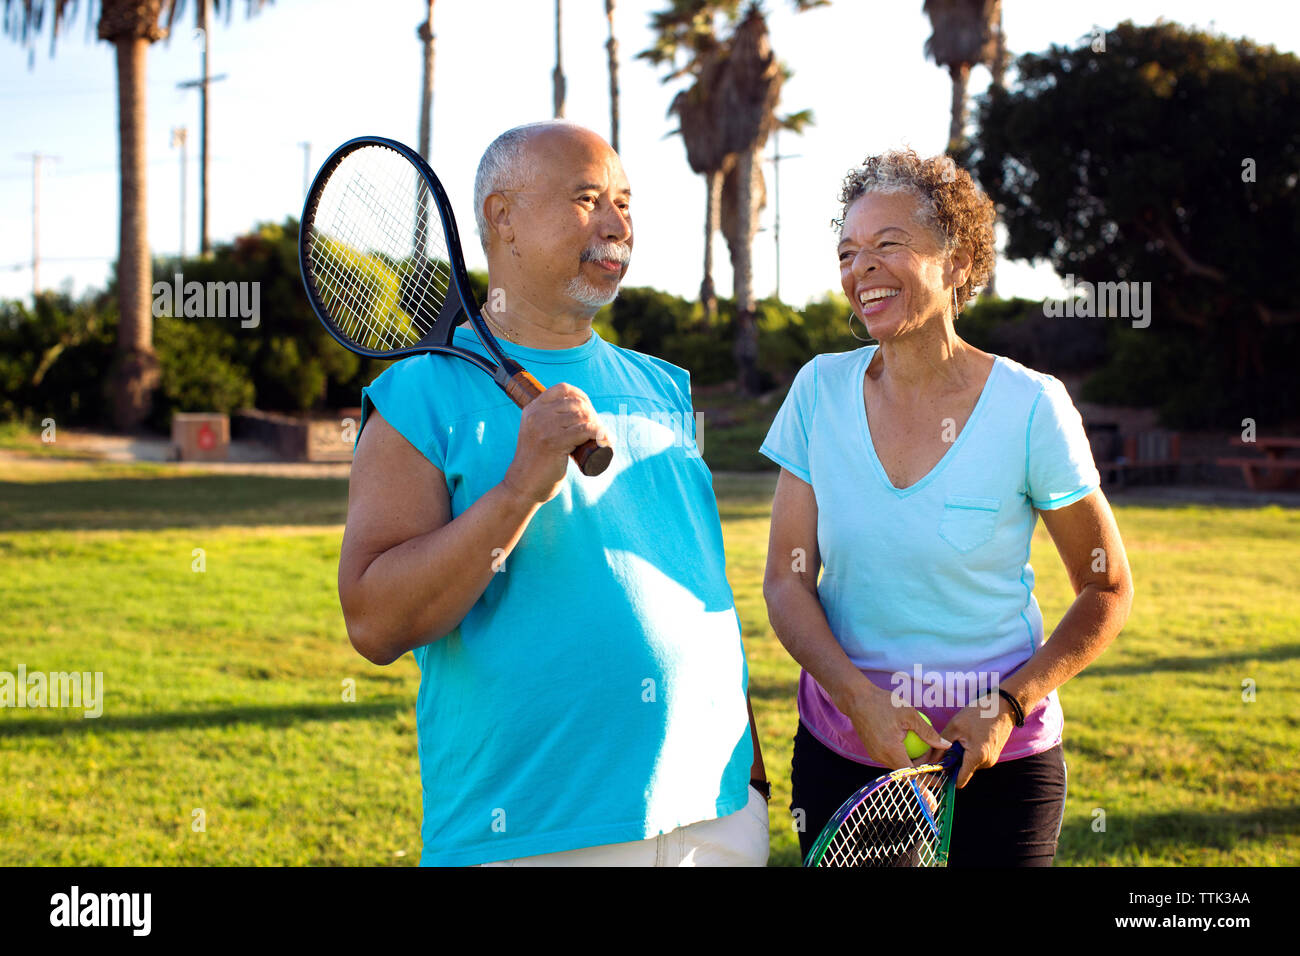 Cheerful friends with rackets talking while standing in park Stock Photo